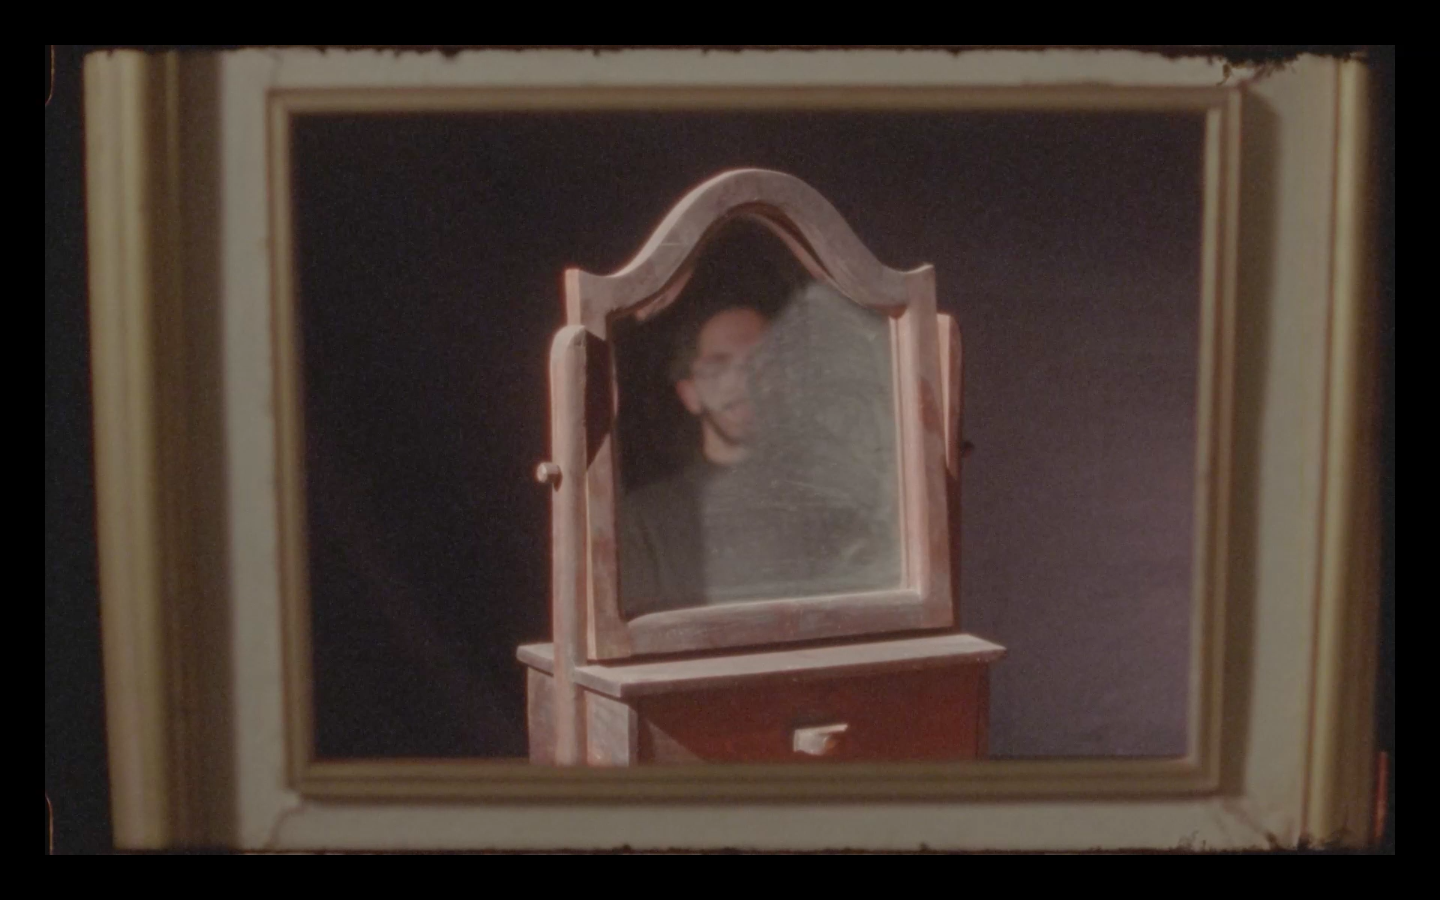 Ricardo, a pale man with glasses, dark short hair and a beard, is in the middle of the frame reflected and obscured in the mirror of a vintage vanity. The scene is framed by a window and the whole image has the soft quality of film.